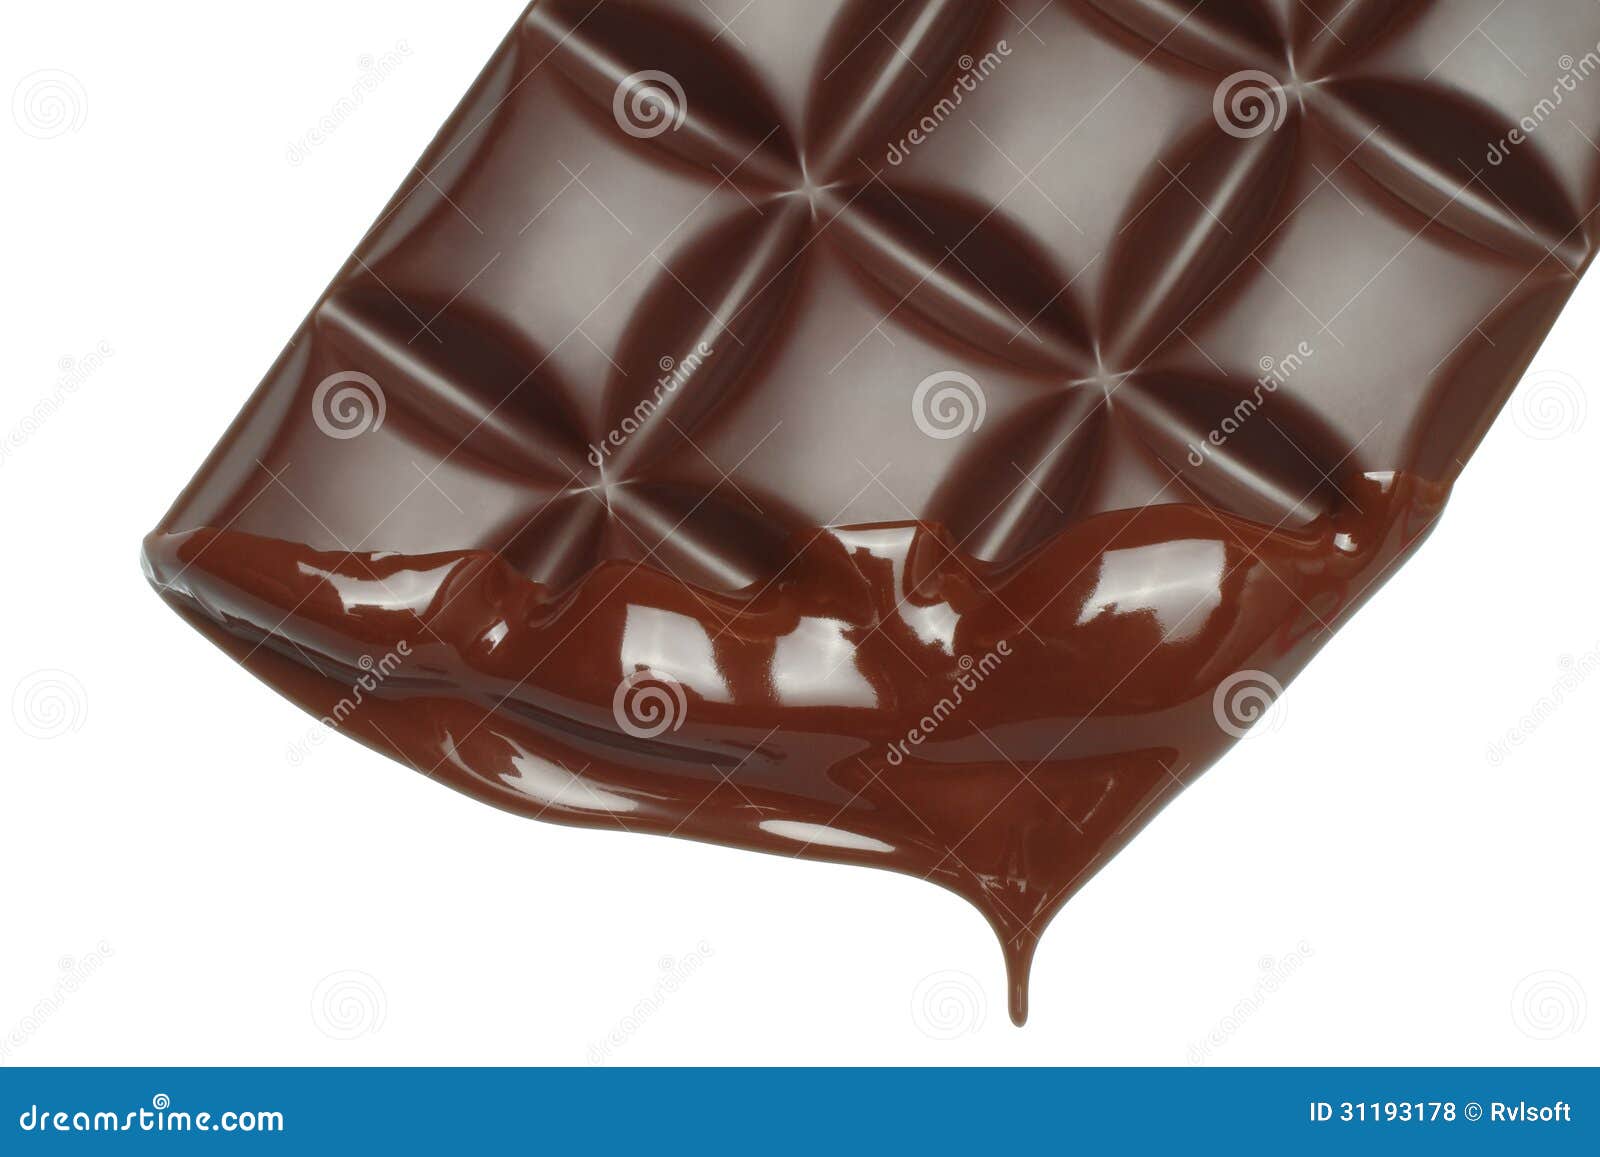 Melting chocolate dripping stock photo. Image of droplet - 31193178